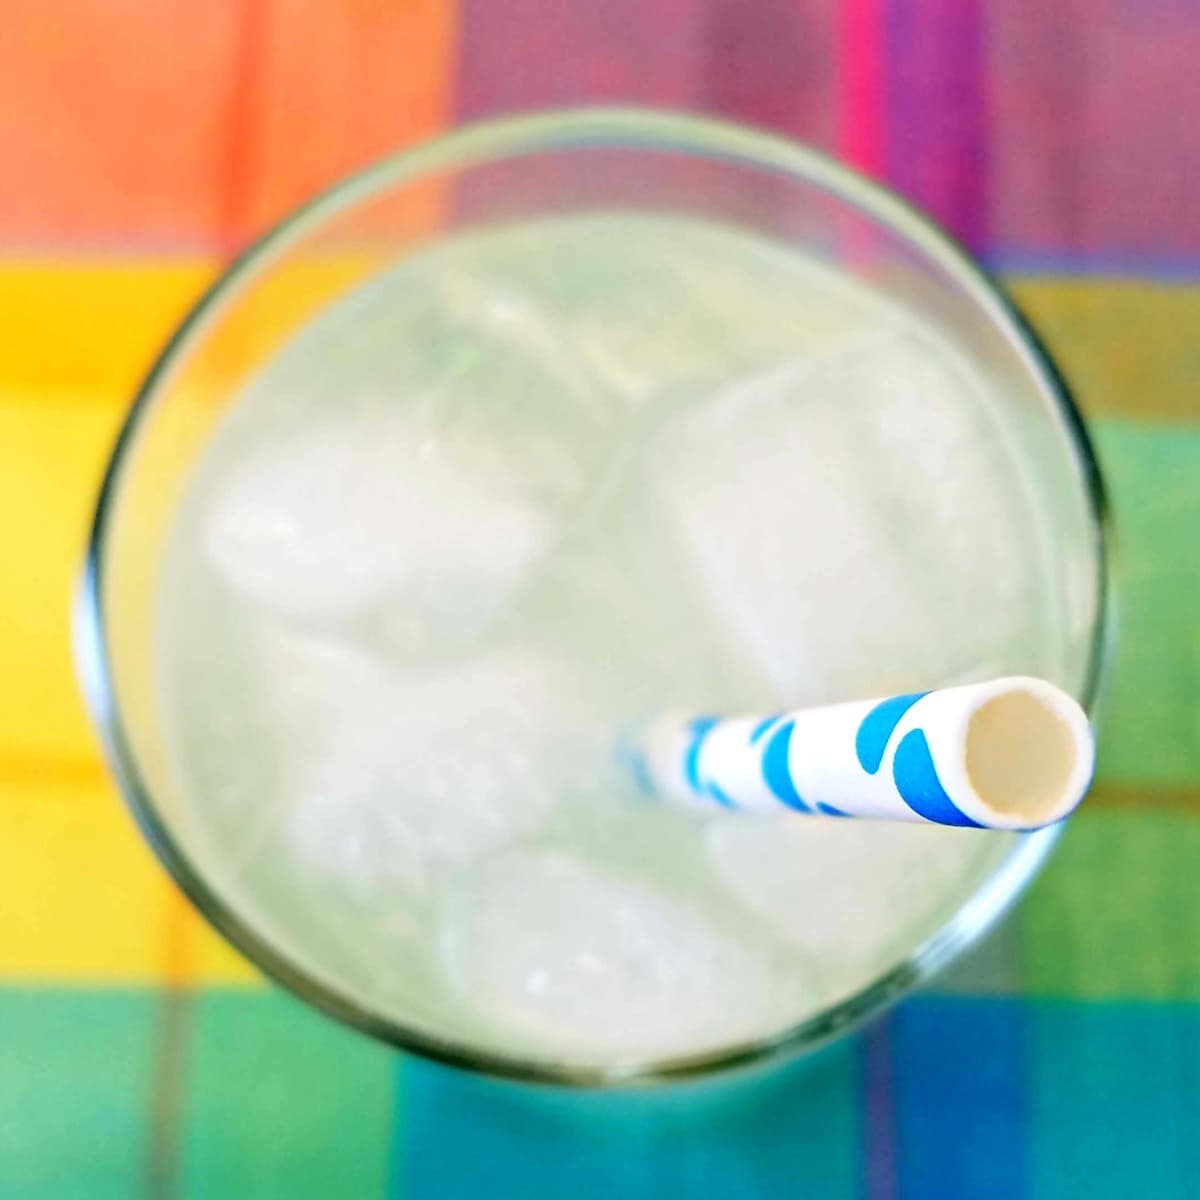 Overhead shot directly downinto a glass of lemonade, with a blue polka-dot straw coming up toward the viewer. 